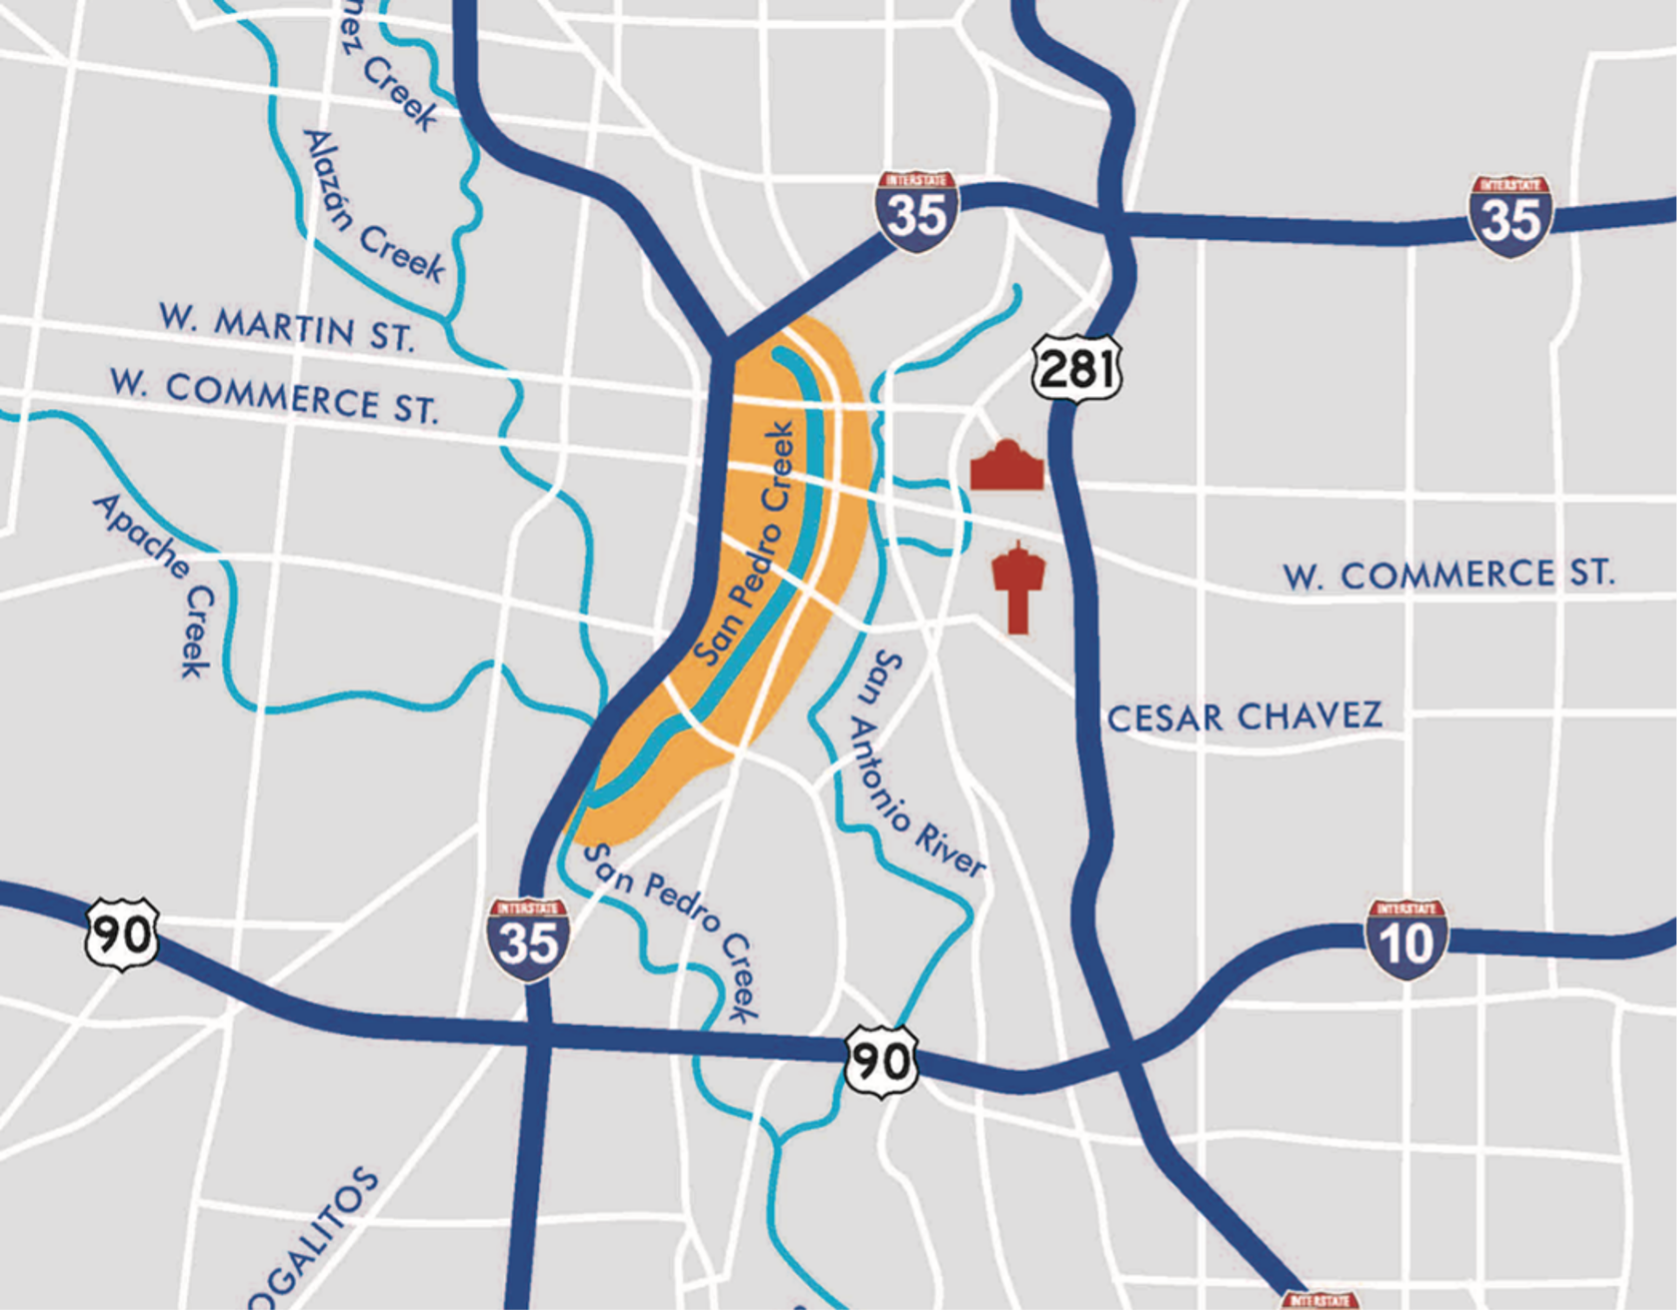 Illustrated map of San Antonio's major highways, streets and San Pedro Creek Highlighted. 